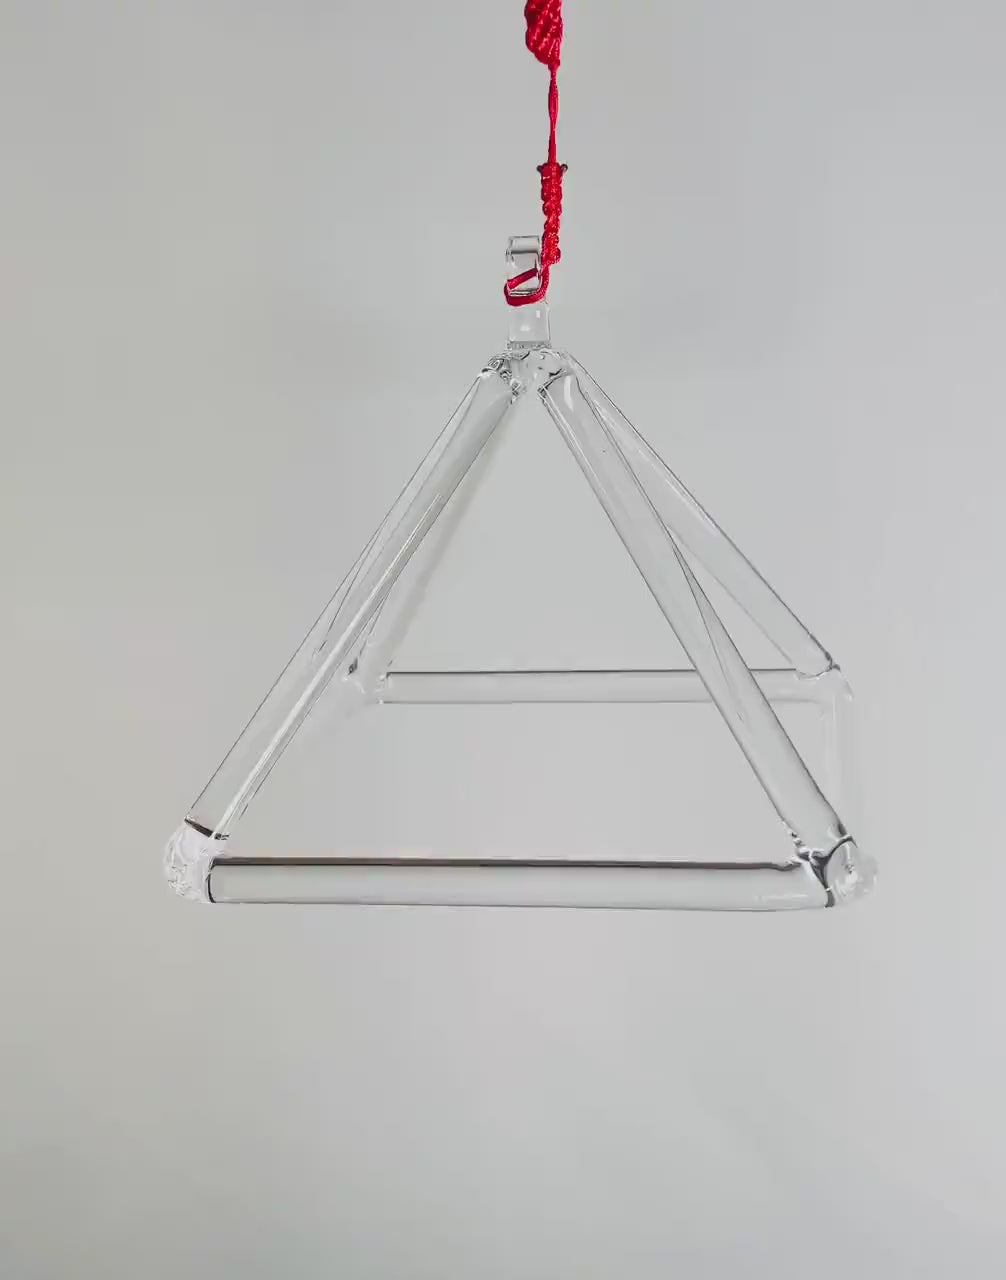 Clear Quartz Crystal Singing Pyramid - 3 Inch - 5 Inch - Sound Healing Musical Instrument With Crystal Striker And Padded Carry Case